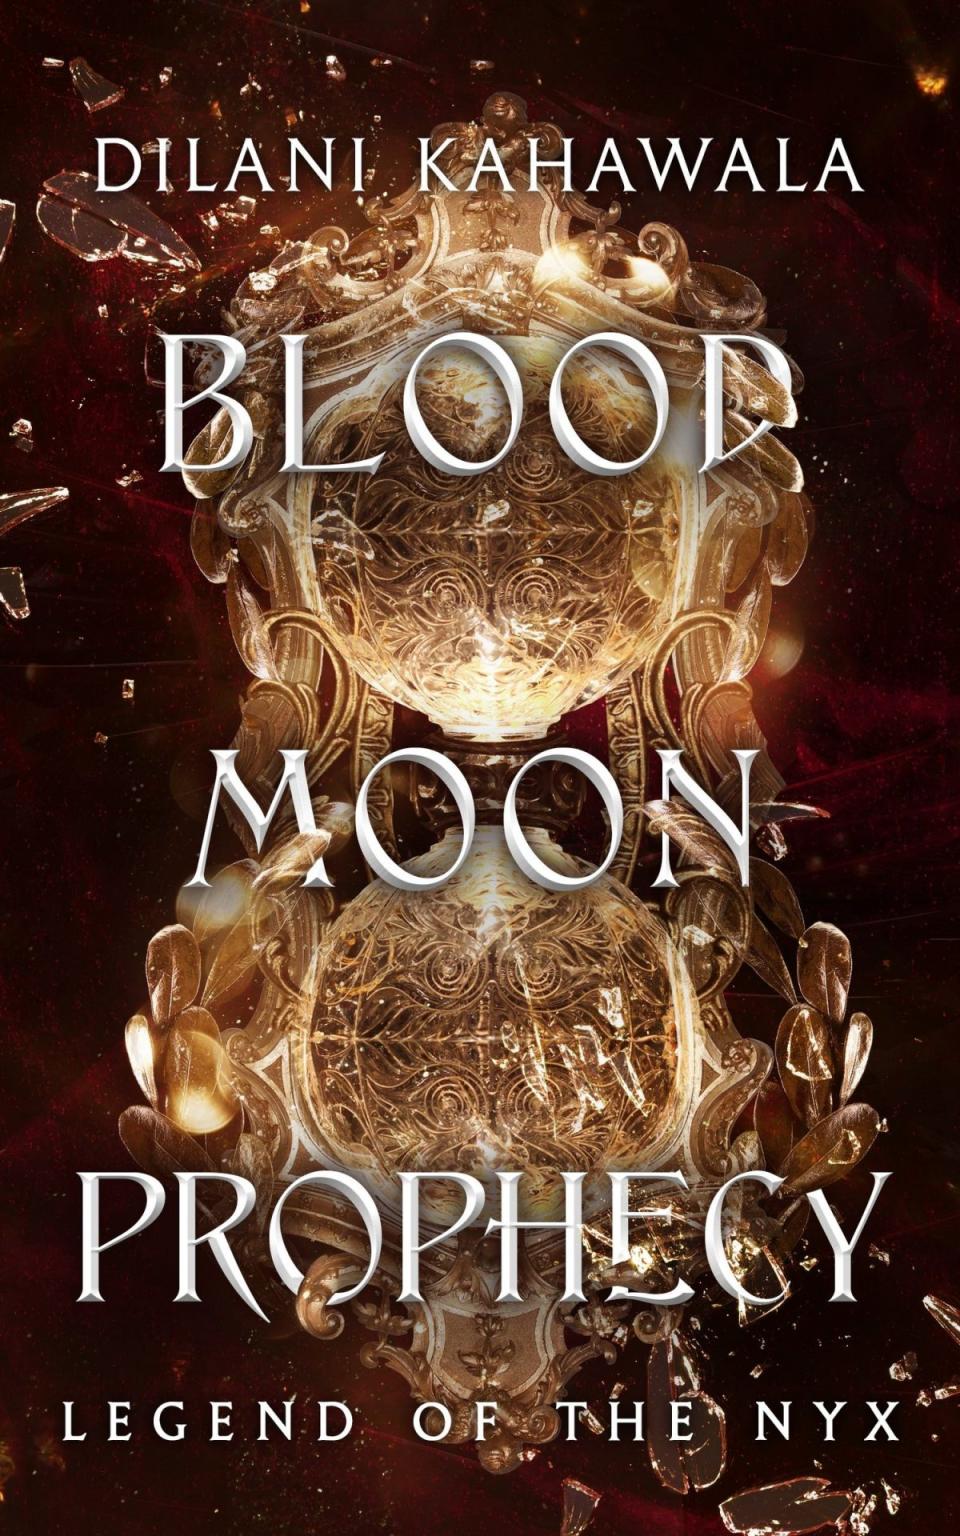 The cover for the Blood Moon Prophecy shows an intricate hour glass